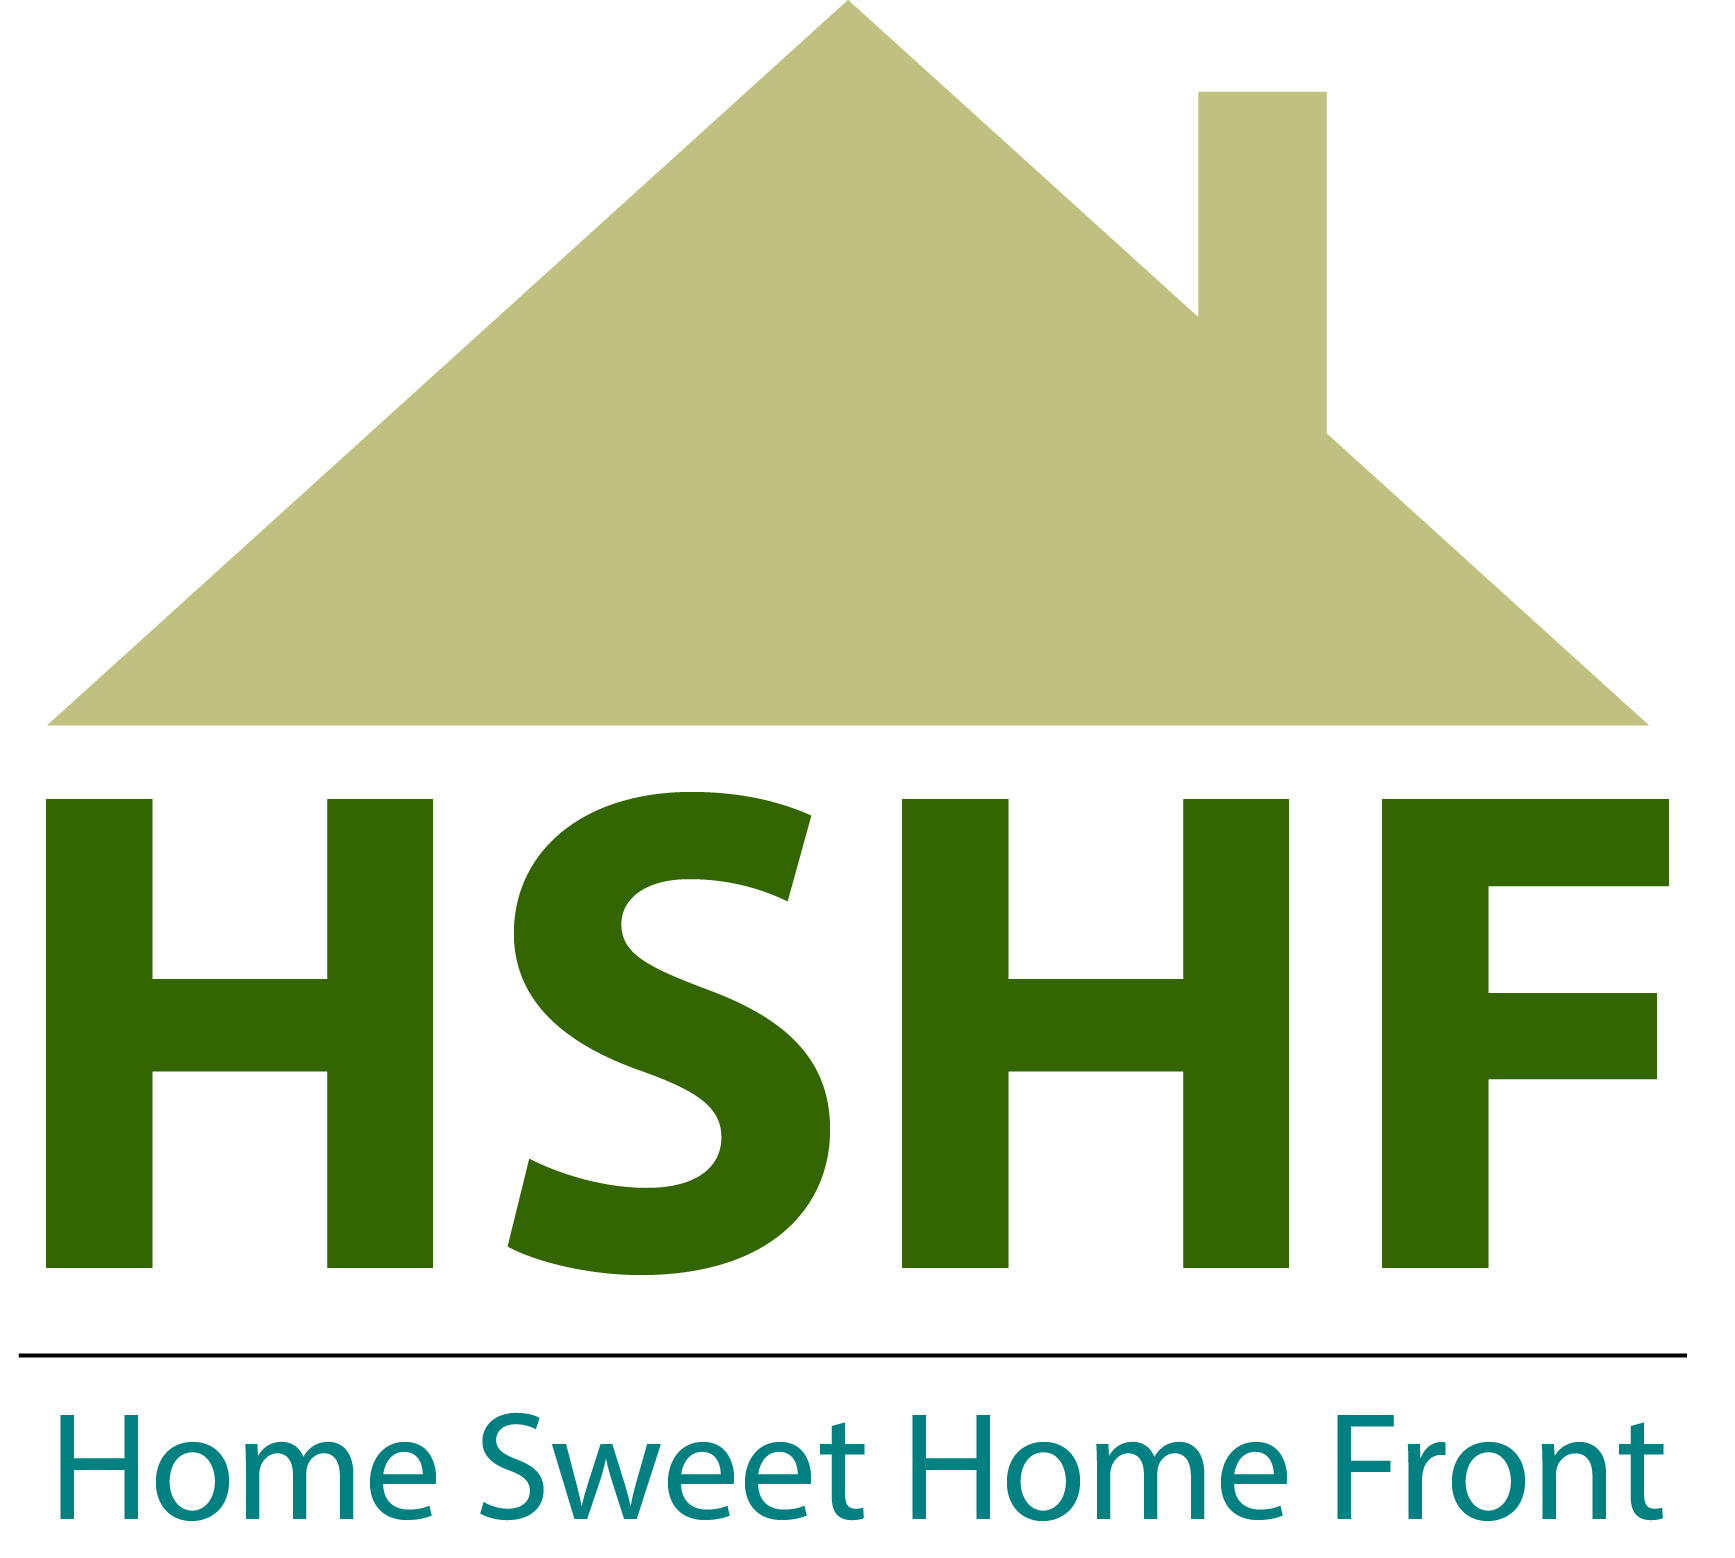 An Image of the 'Home Sweet Home Front' Logo